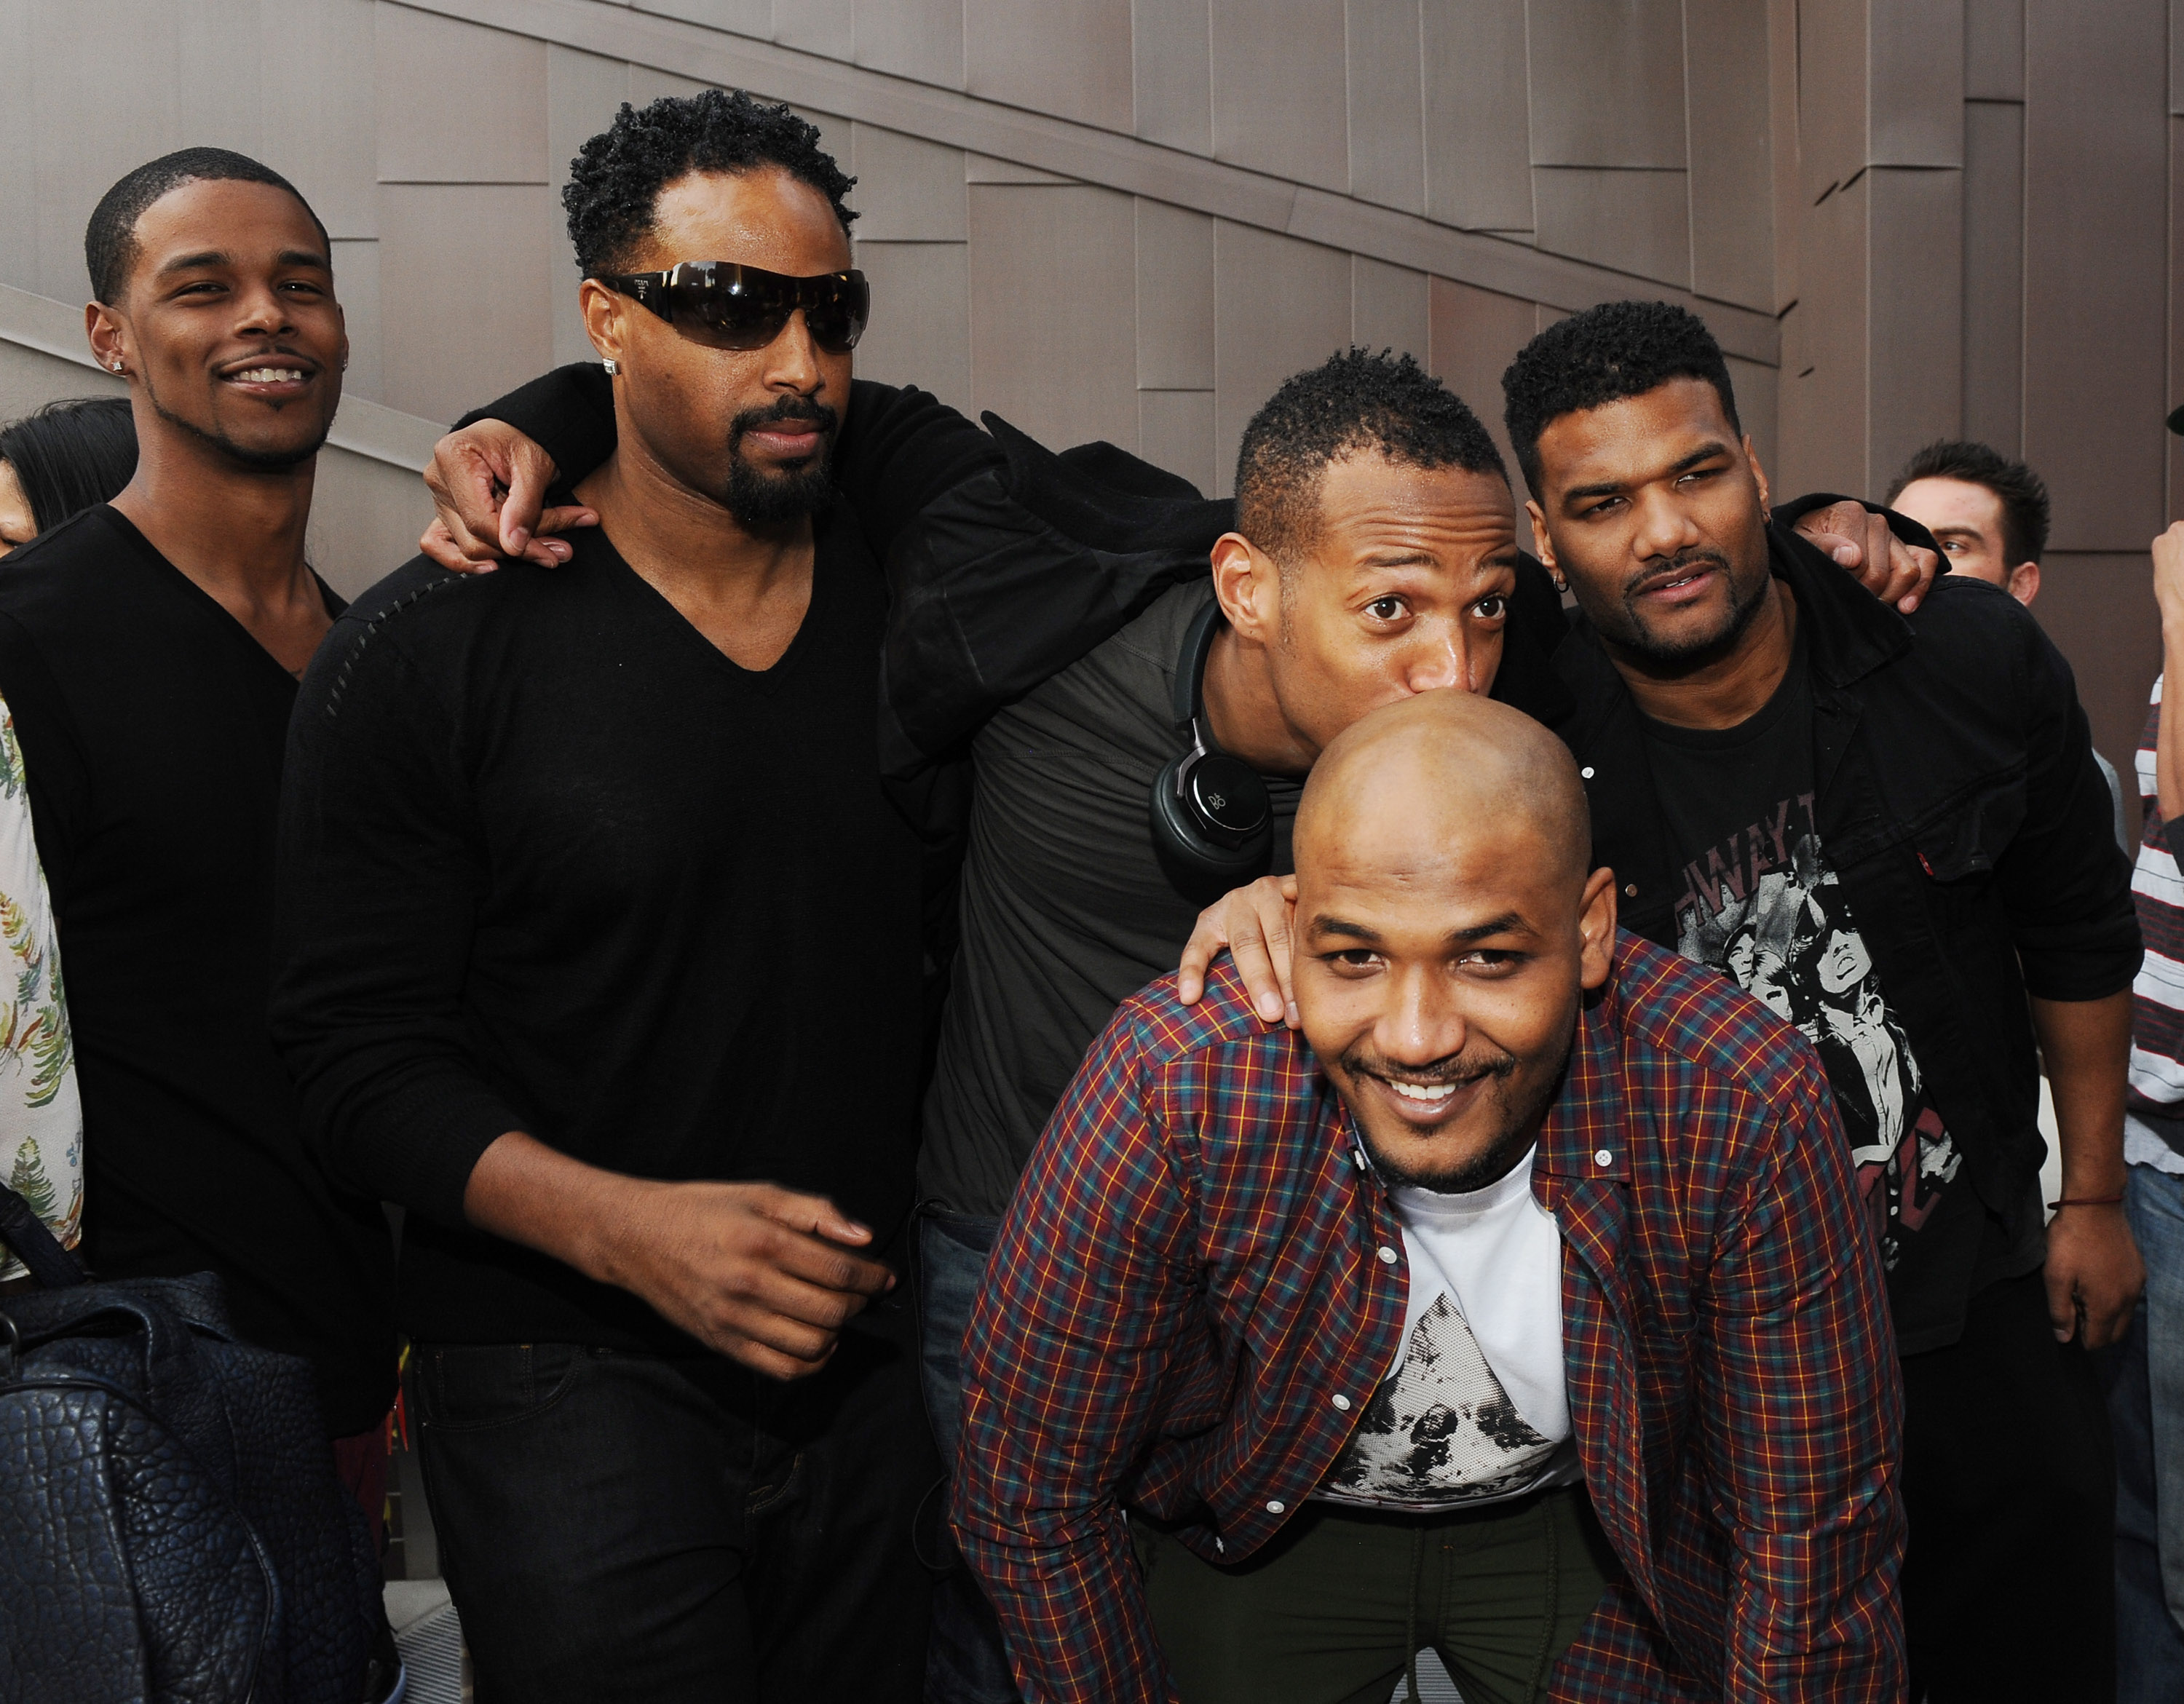 Shawn Wayans, Marlon Wayans, Damian Wayans and Mike Wayans attend Vanessa Simmons’ baby shower at Sugar Factory Hollywood, on January 18, 2014, in Los Angeles, California. | Source: Getty Images